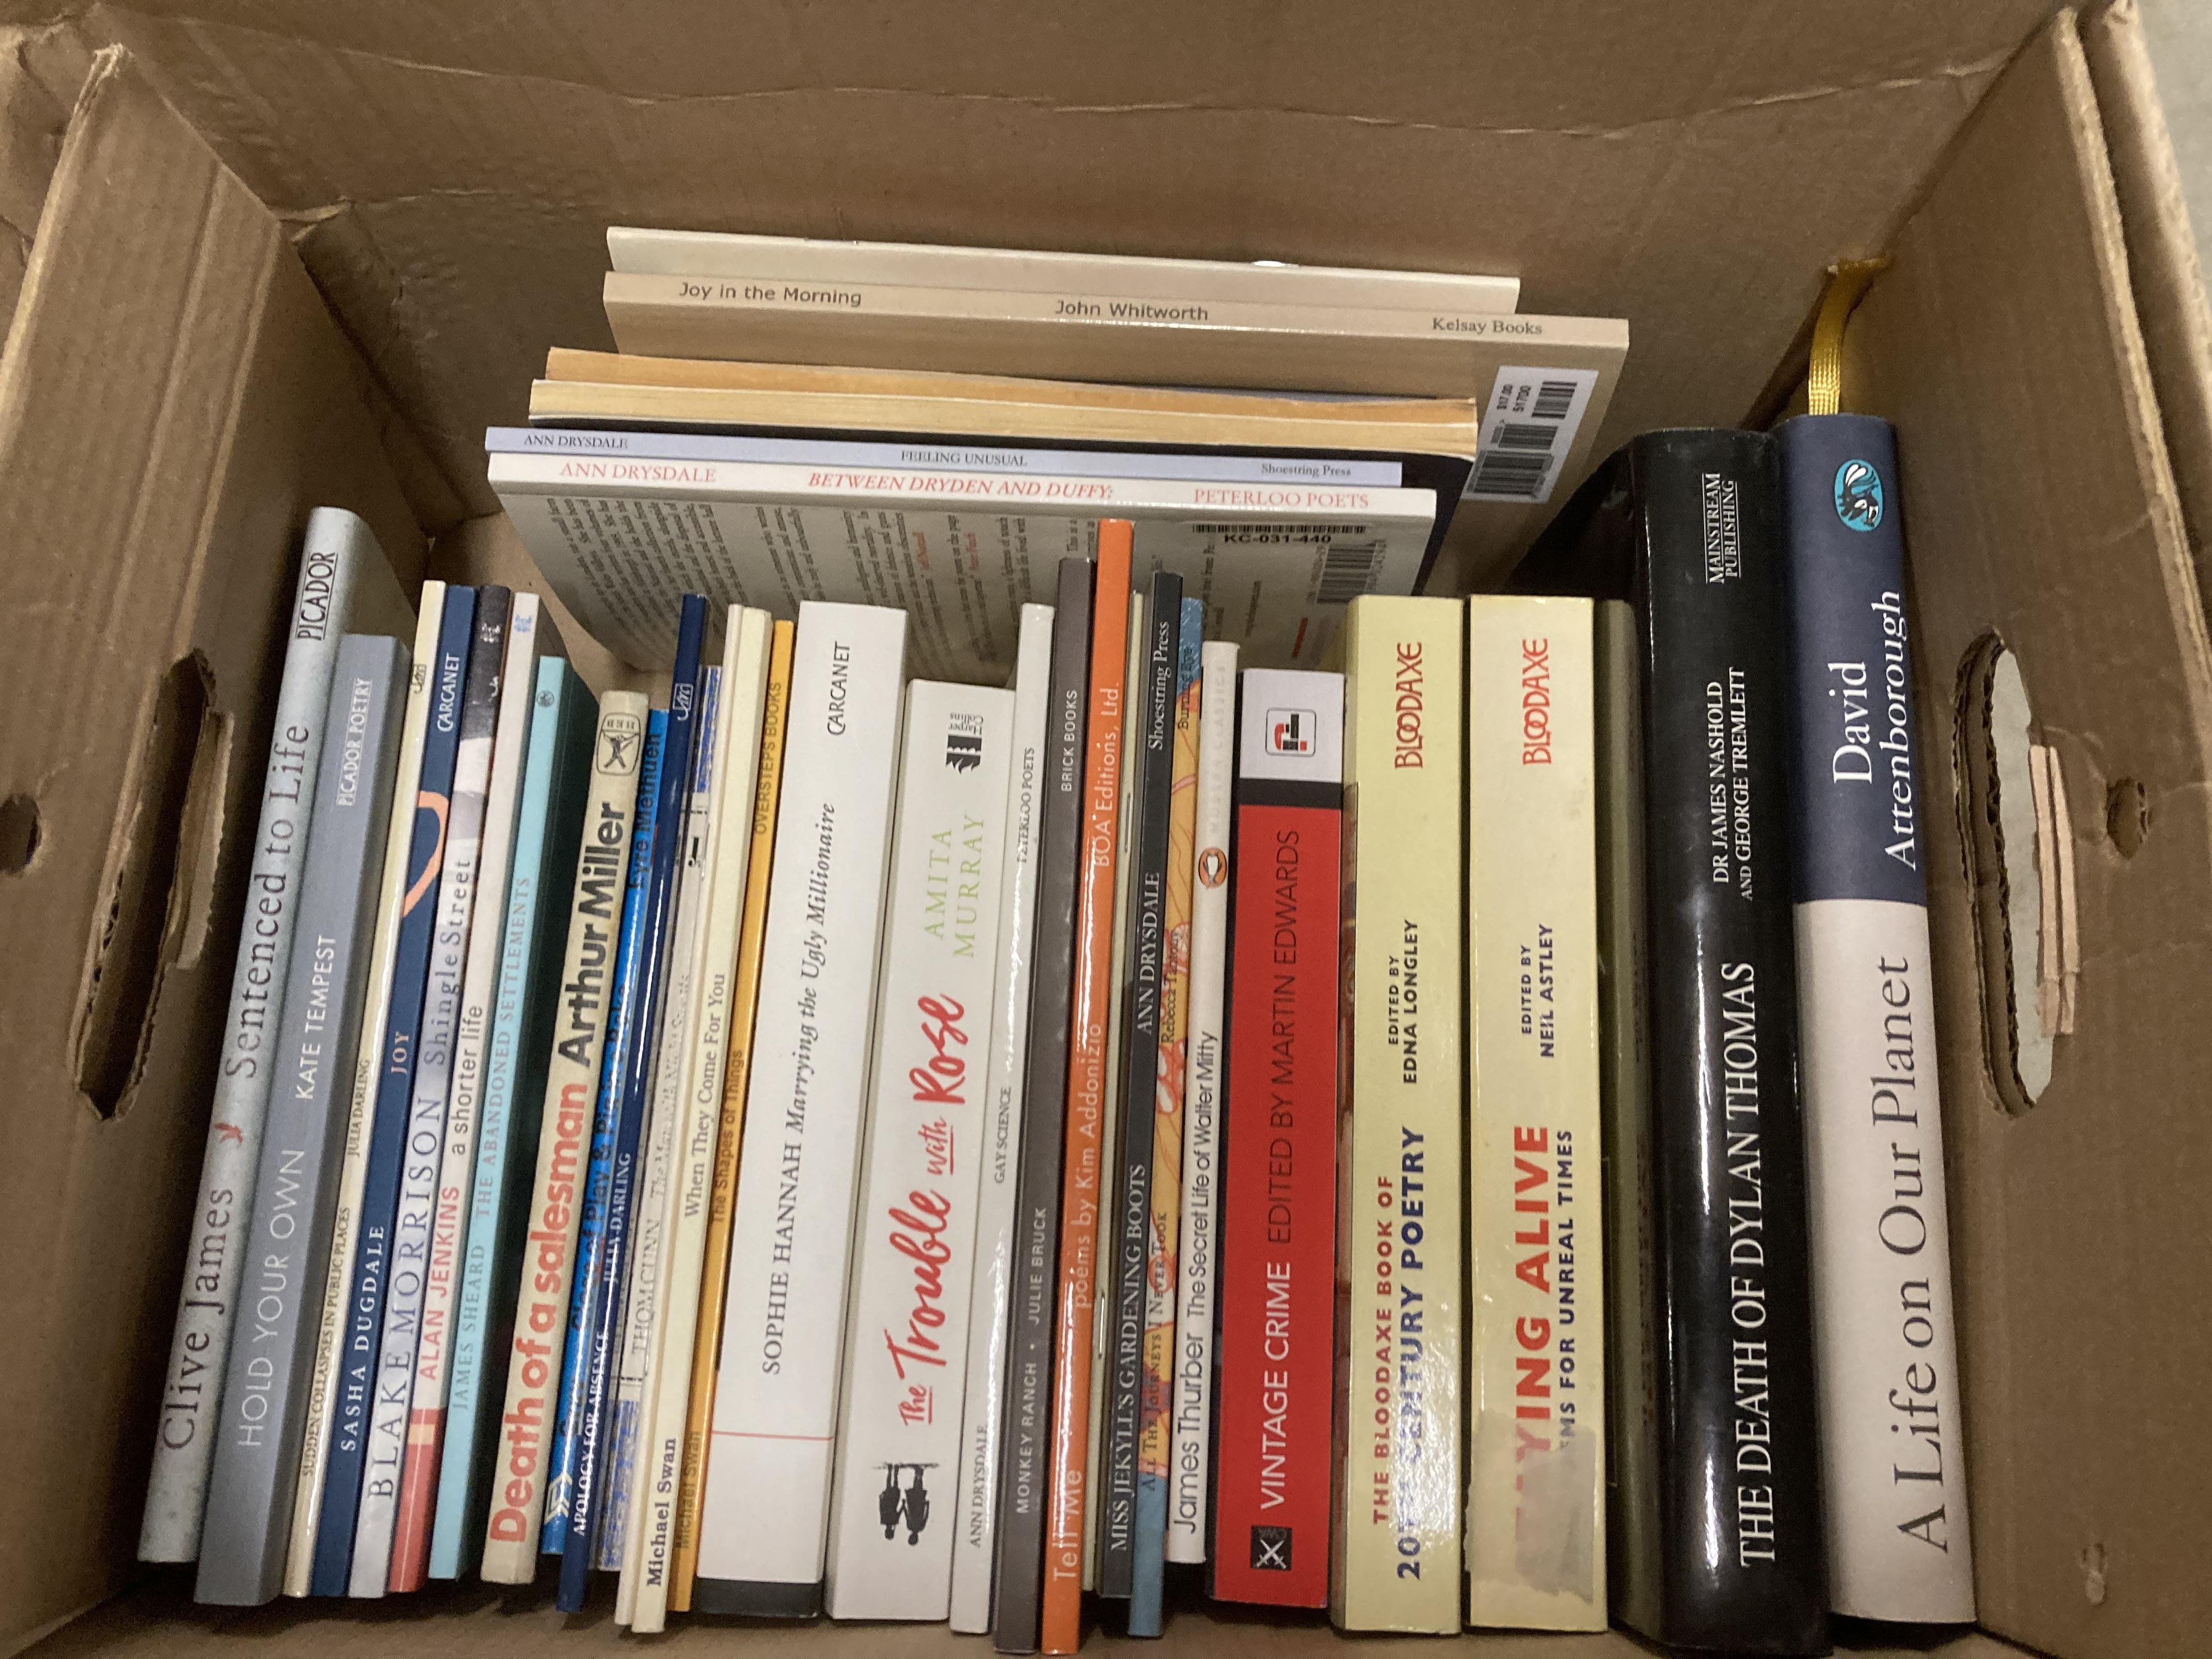 Contents to box - thirty-two books on poetry, crime, novels,